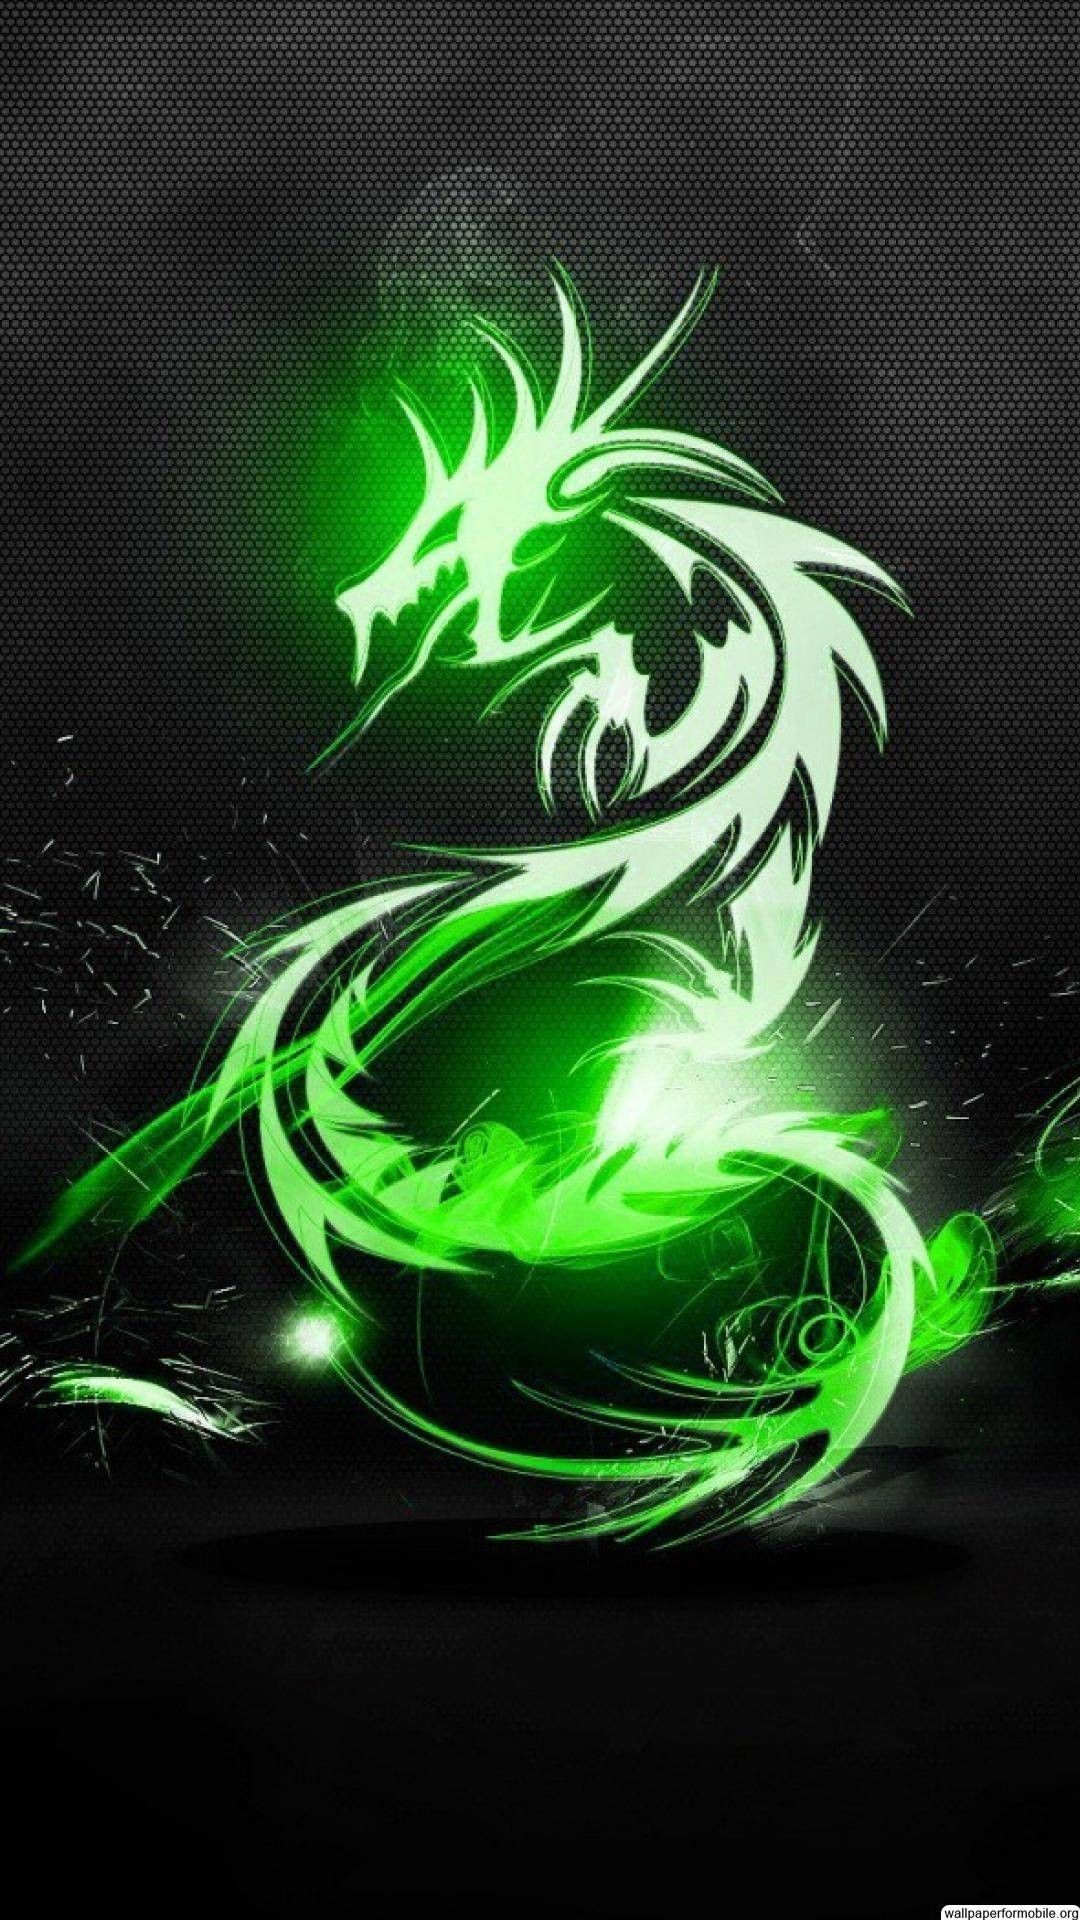 Cool Awesome Wallpaper Download. Dragon wallpaper iphone, Dragon picture, Dragon artwork